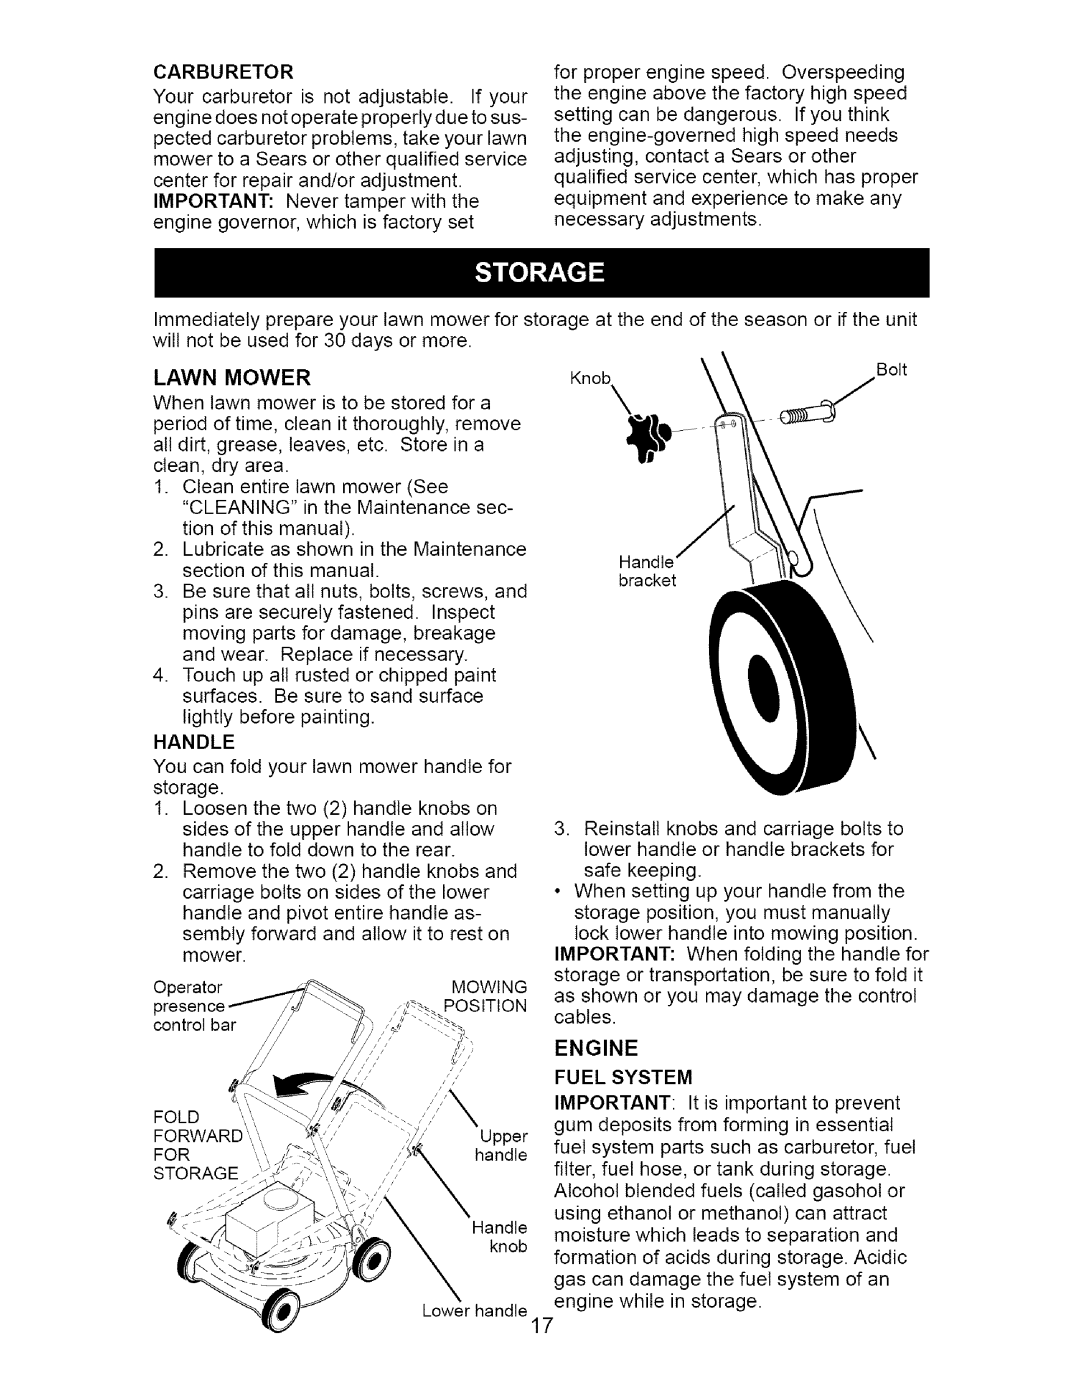 Craftsman 917.377011 owner manual ooX \ :/oo,t, Engine, Carburetor, Lawn Mower, Fuel System, It is important to prevent 